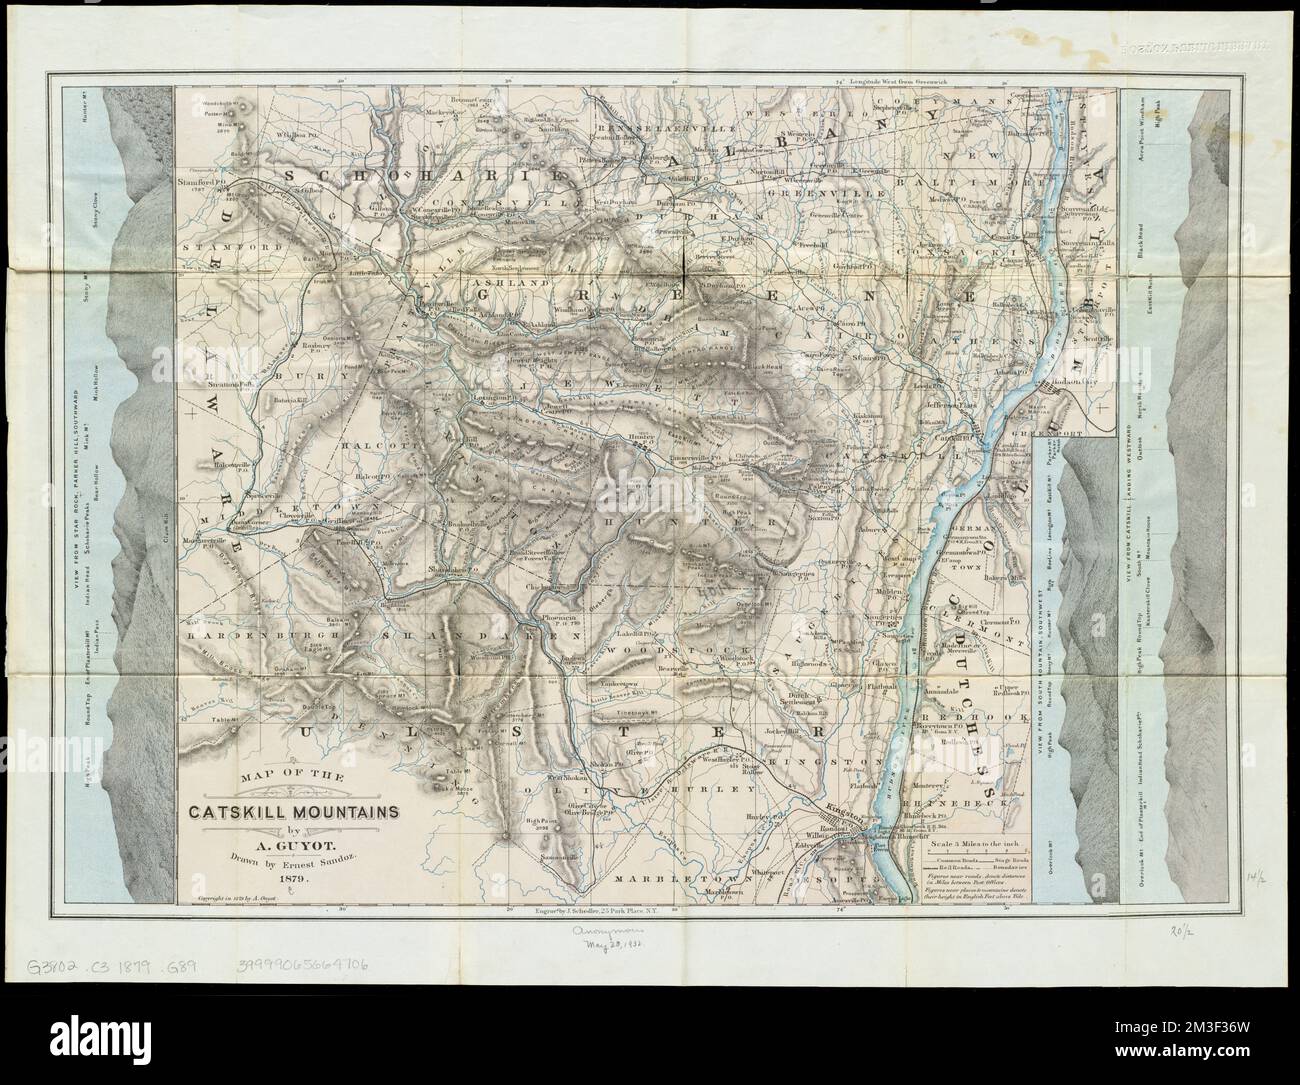 Map Of The Catskill Mountains Catskill Mountains Ny Maps Norman B Leventhal Map Center Collection 2M3F36W 